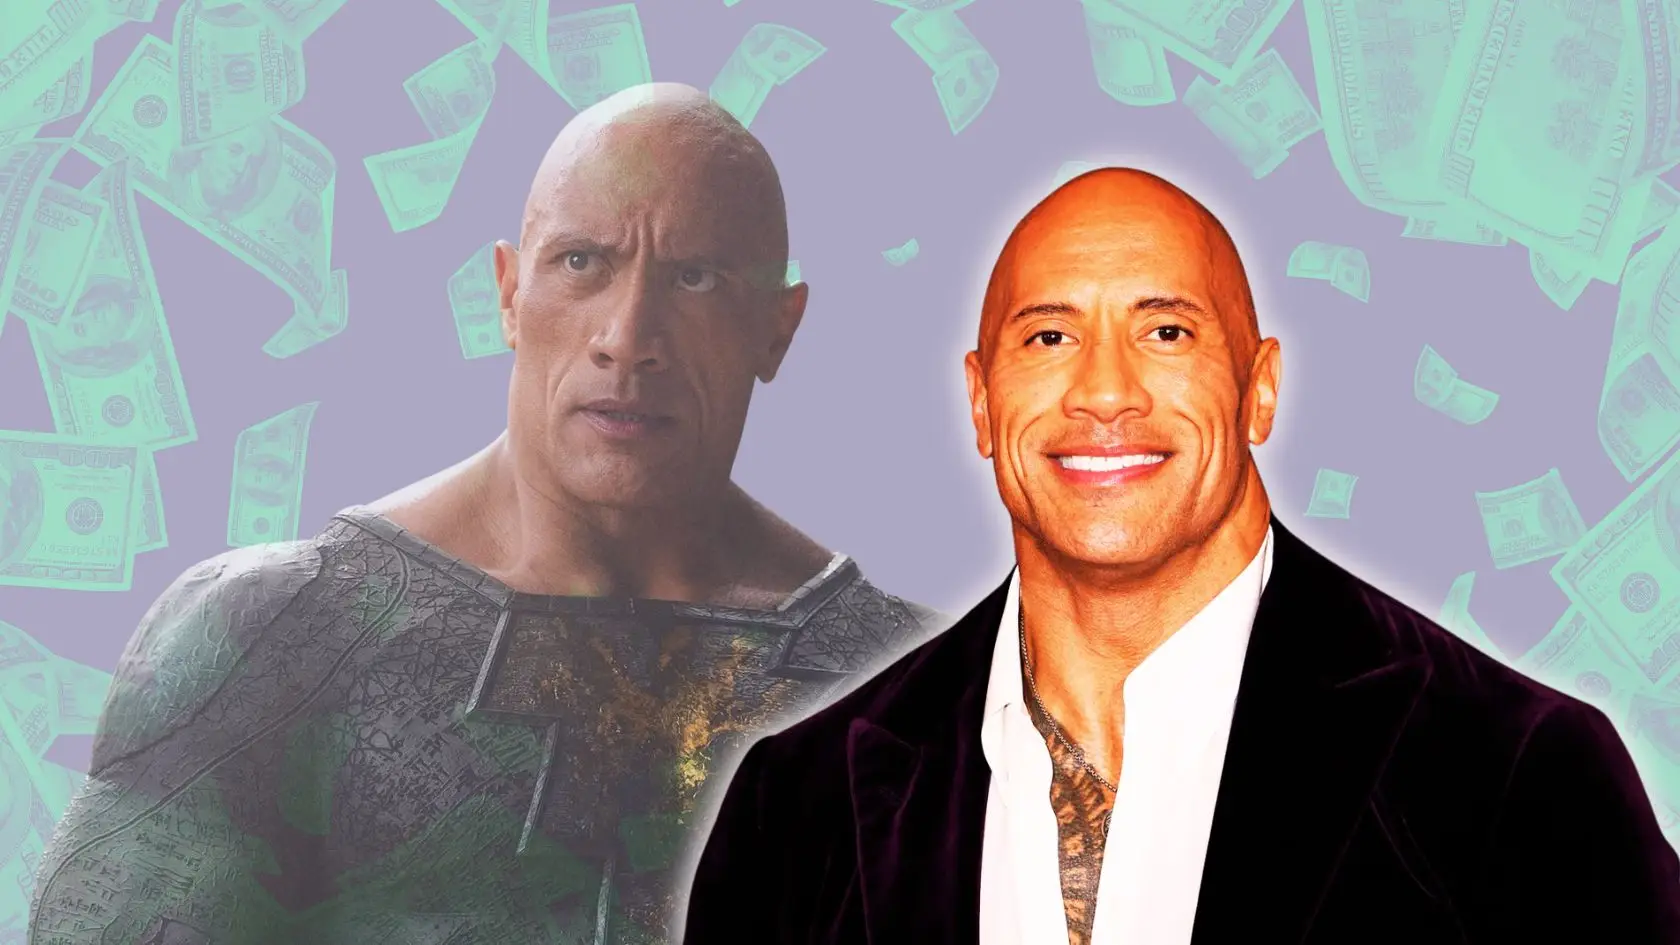 Dwayne 'The Rock' Johnson's Bankability_ Does His Star Power Justify Hefty Fees